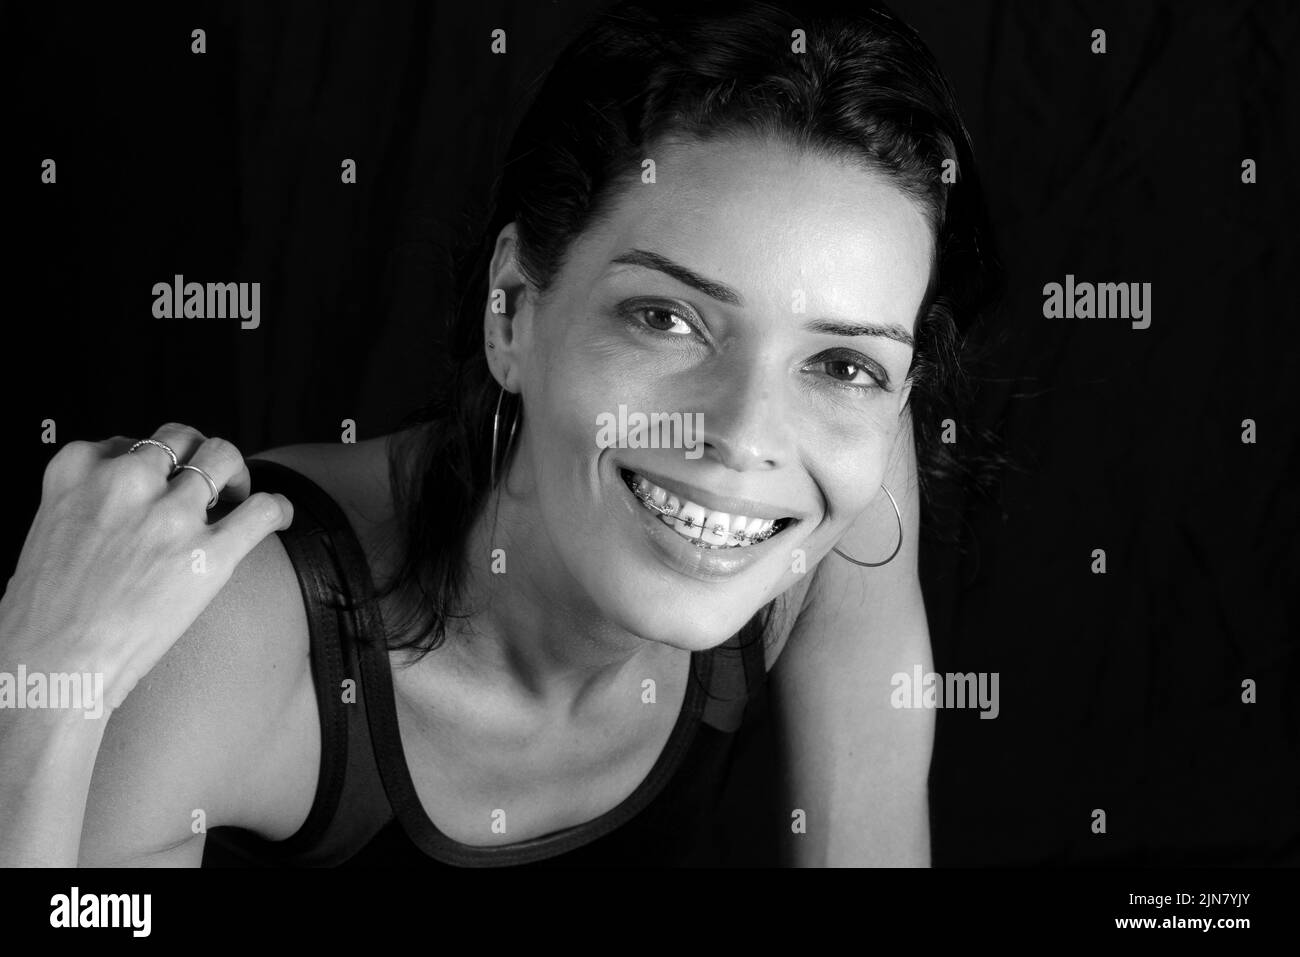 Studio Portrait in black and white of young woman in black t-shirt smiling at camera against black studio background. Salvador, Brazil. Stock Photo